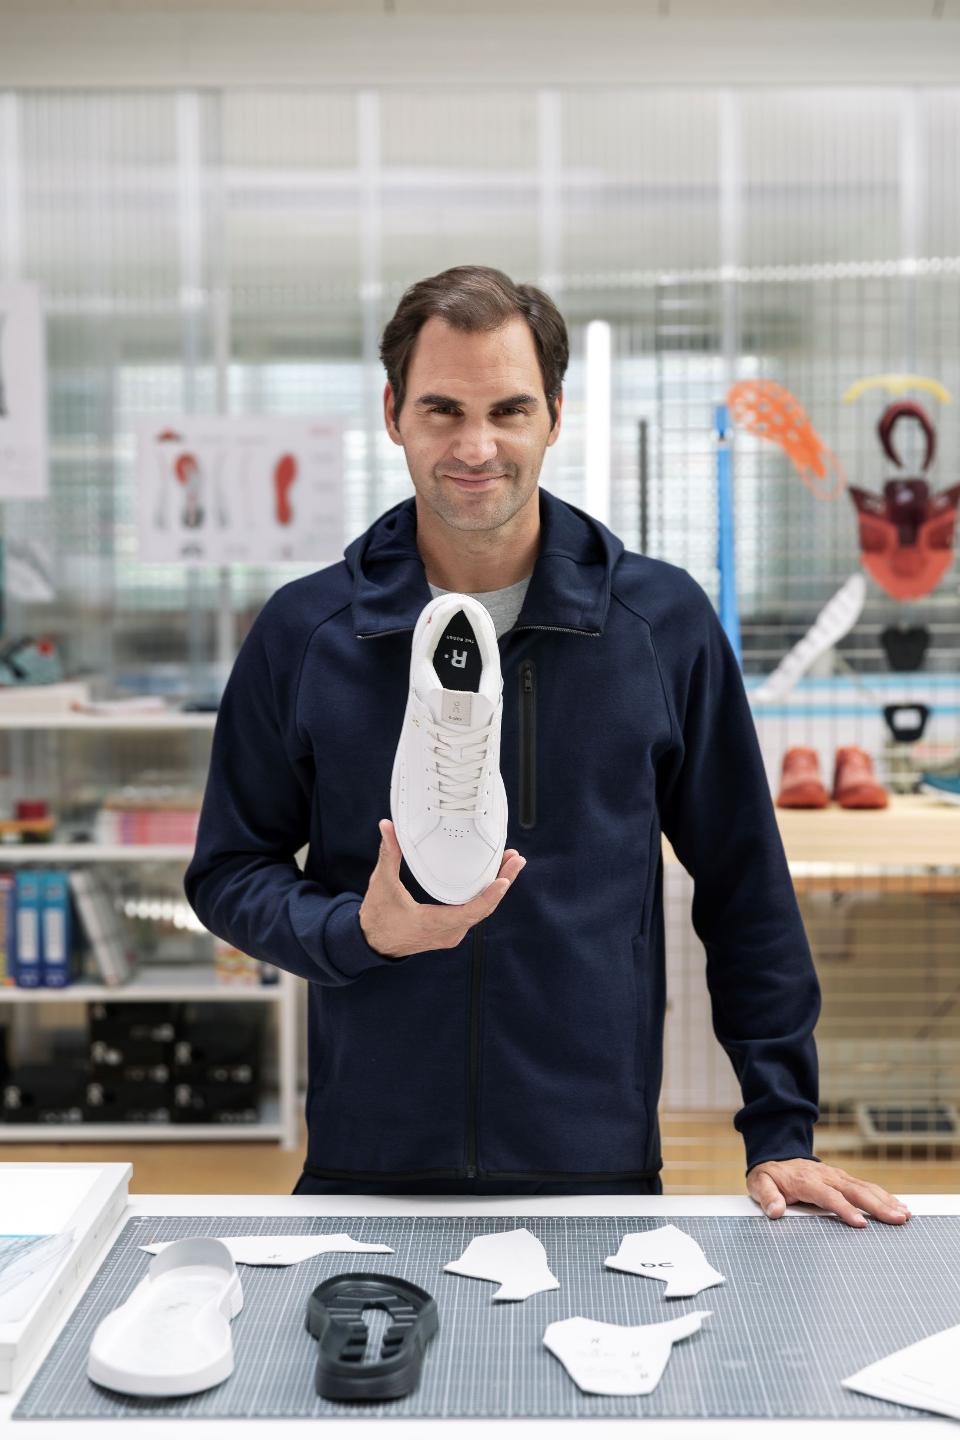 Tennis great Roger Federer displays his new lifestyle sneaker at the Zurich headquarters of startup performance running brand On.